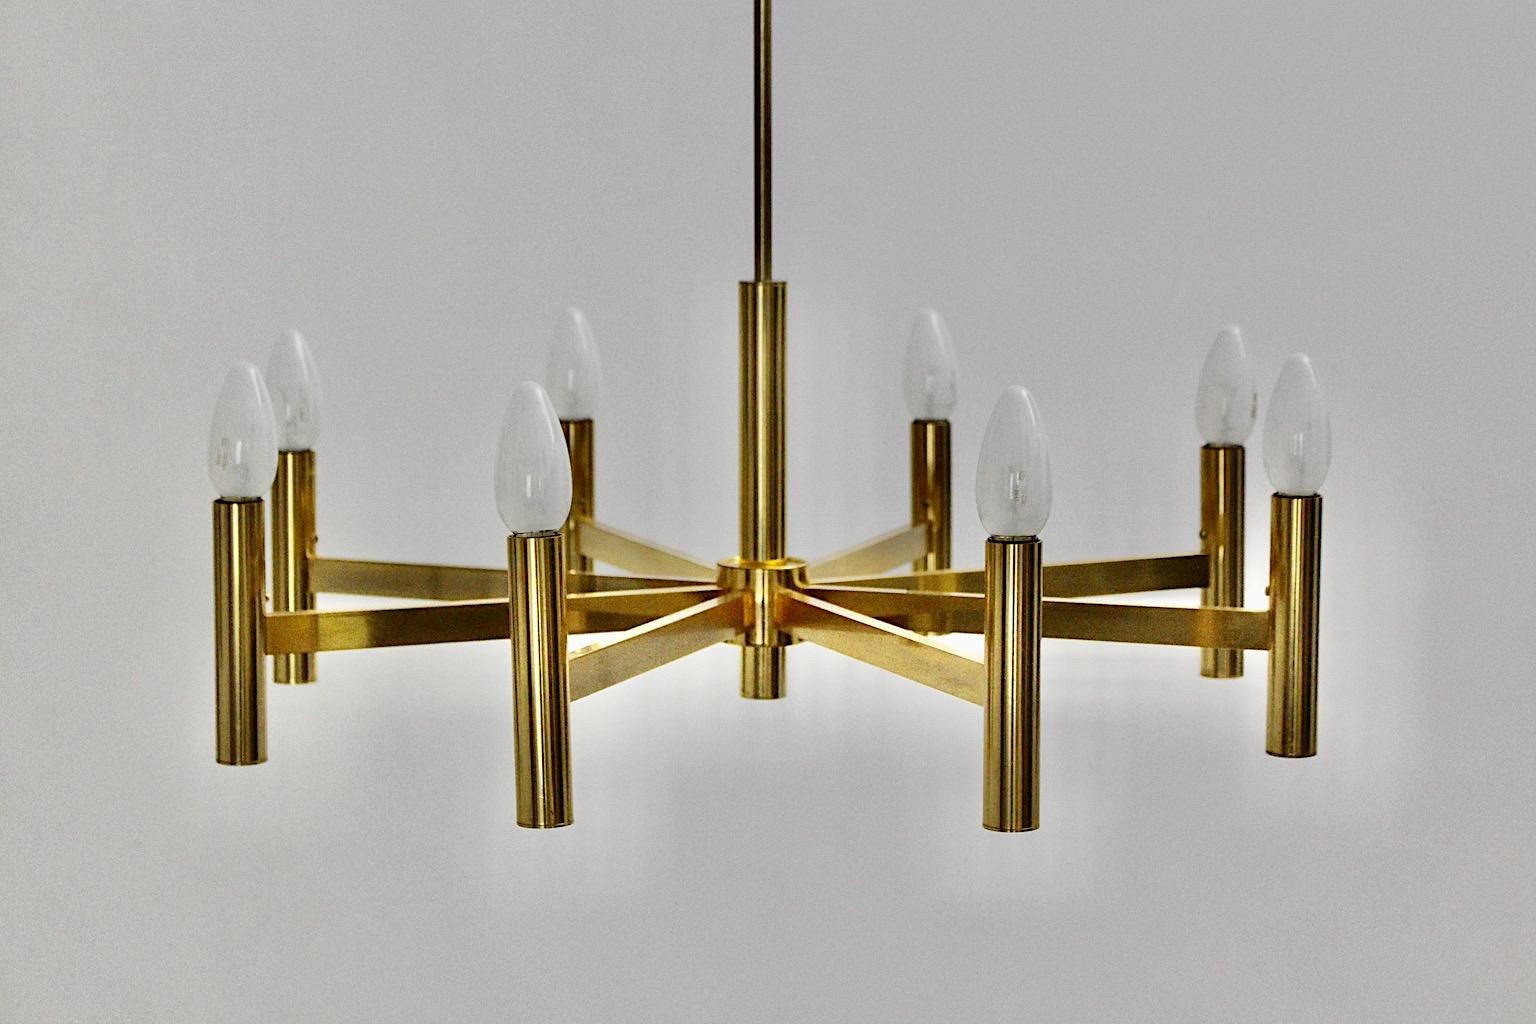 Gaetano Sciolari vintage golden metal Mid-Century Modern chandelier designed 1960s, Italy.
Gaetano Sciolari came from a family, who designed and manufactured lightings.
He was famed for lightings in futuristic and sculptural metal designs.
This